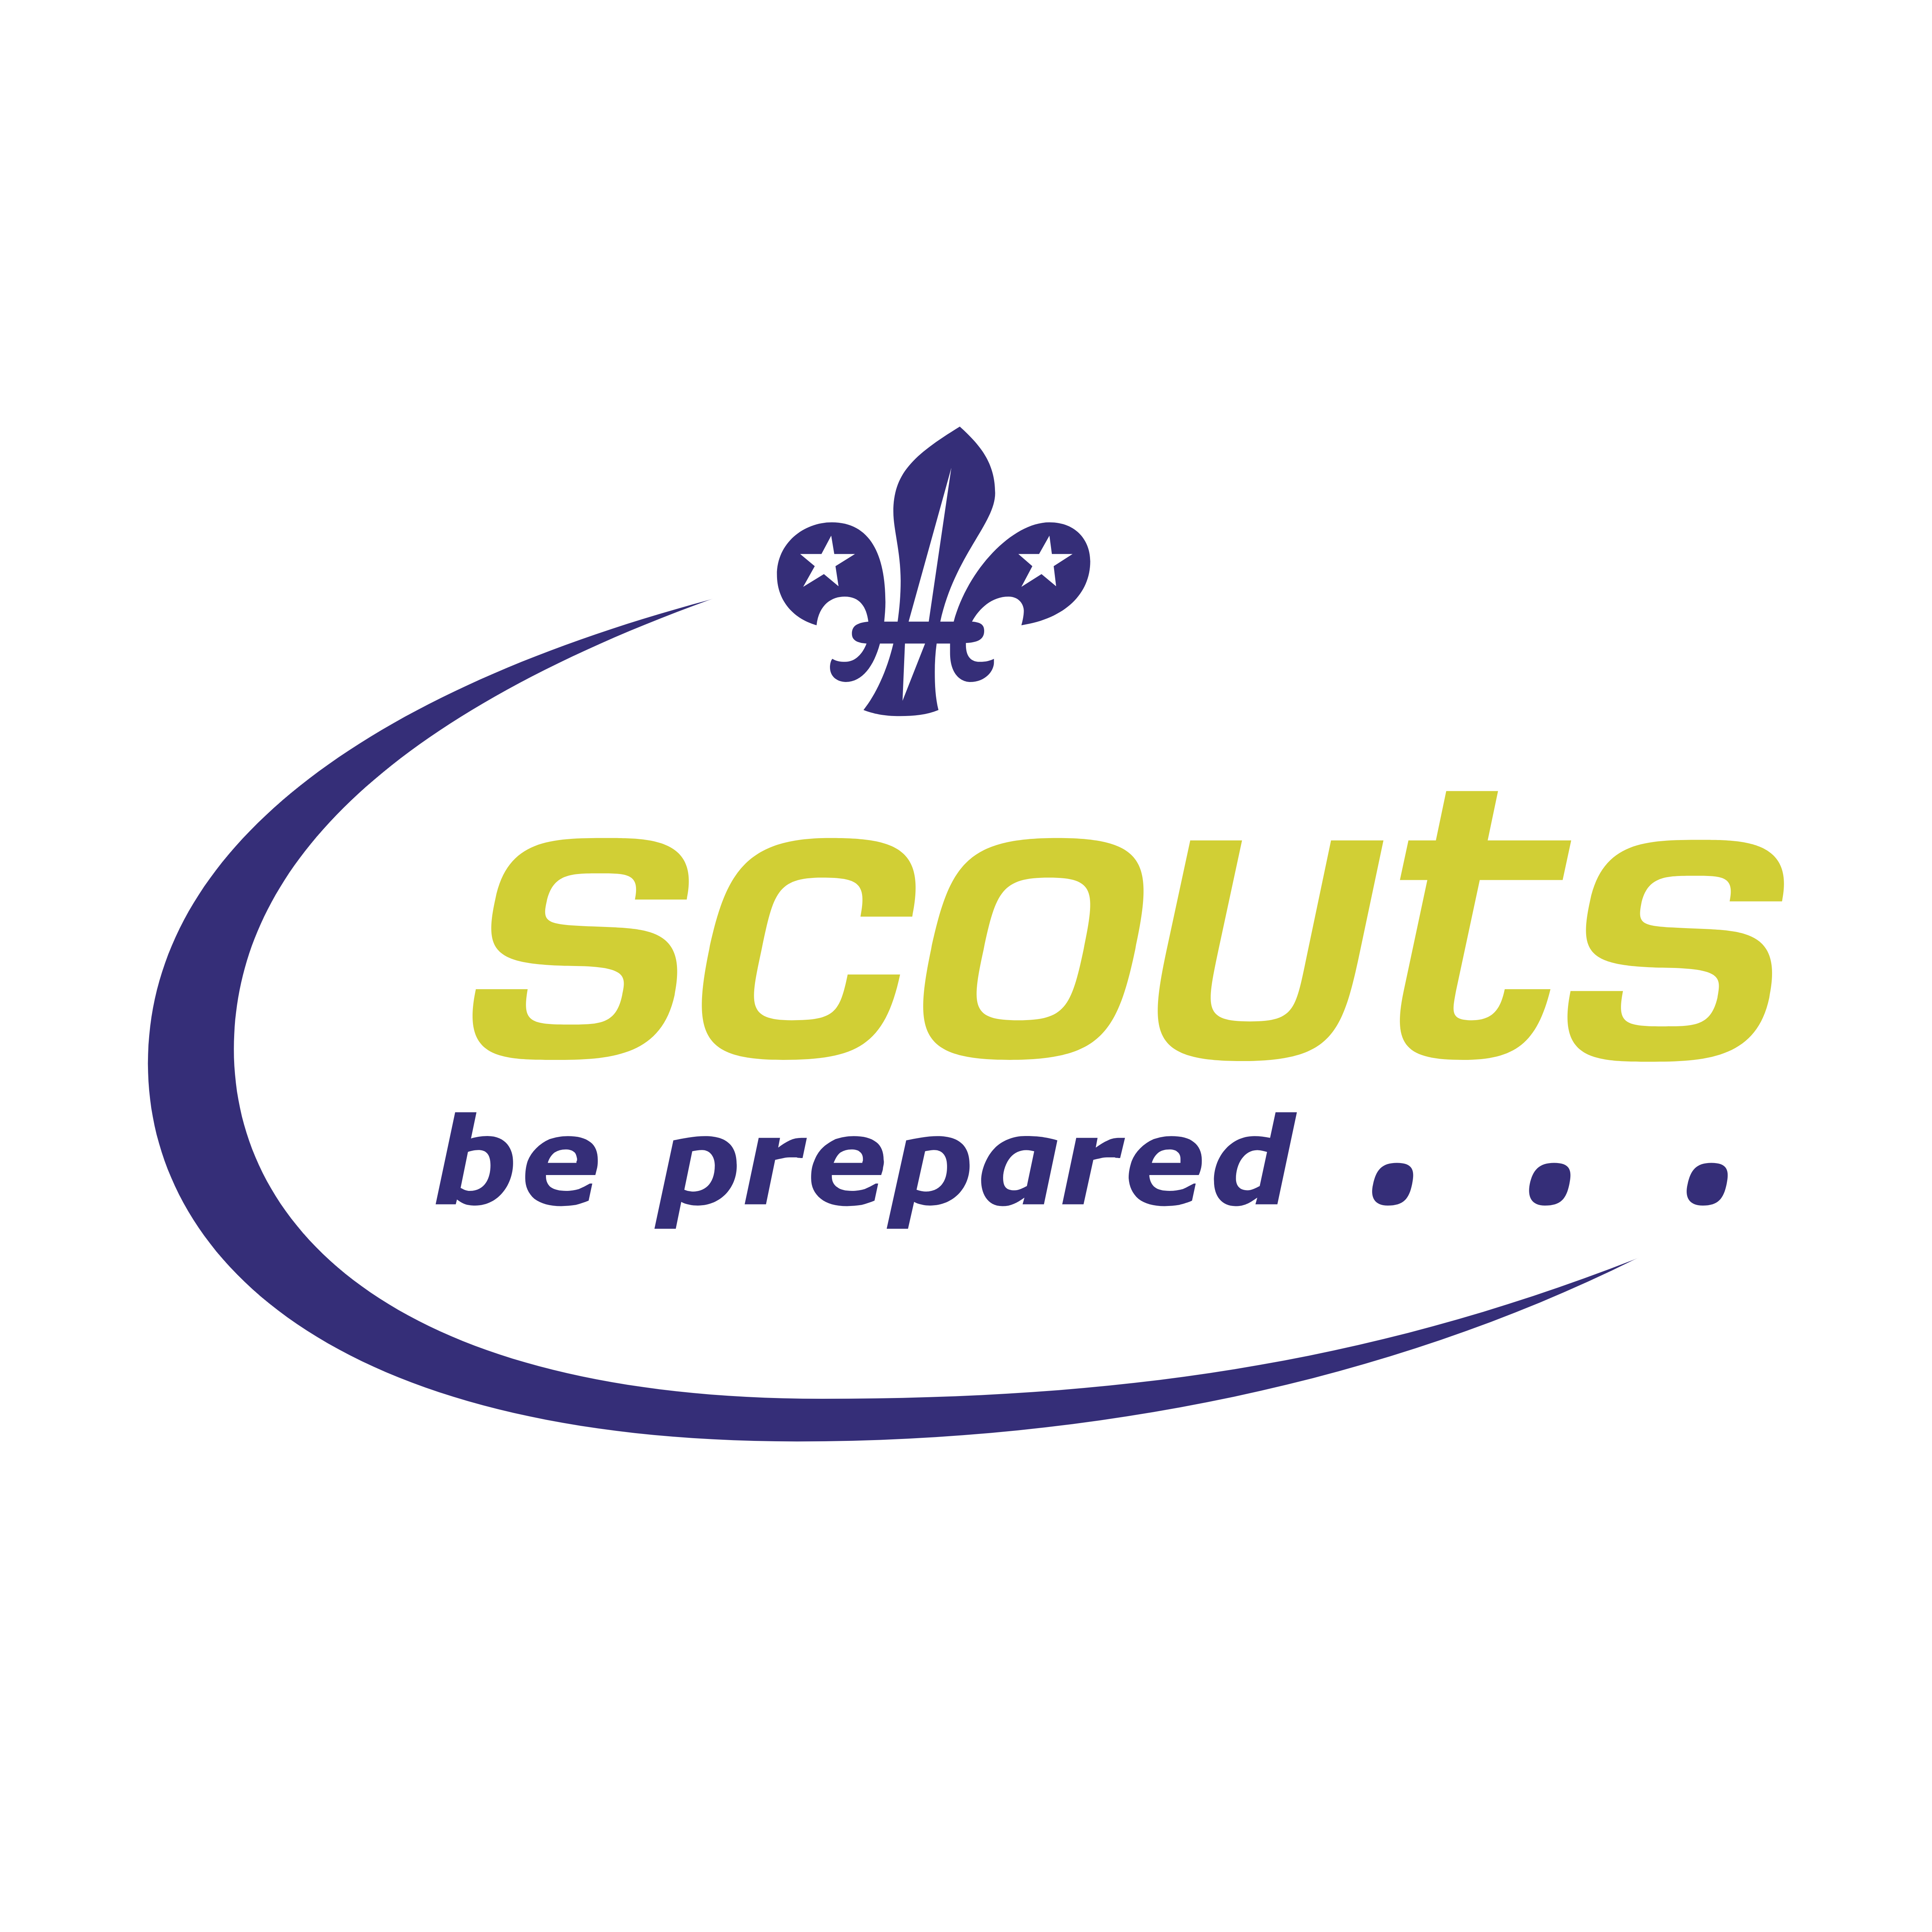 Download Scouts - Logos Download